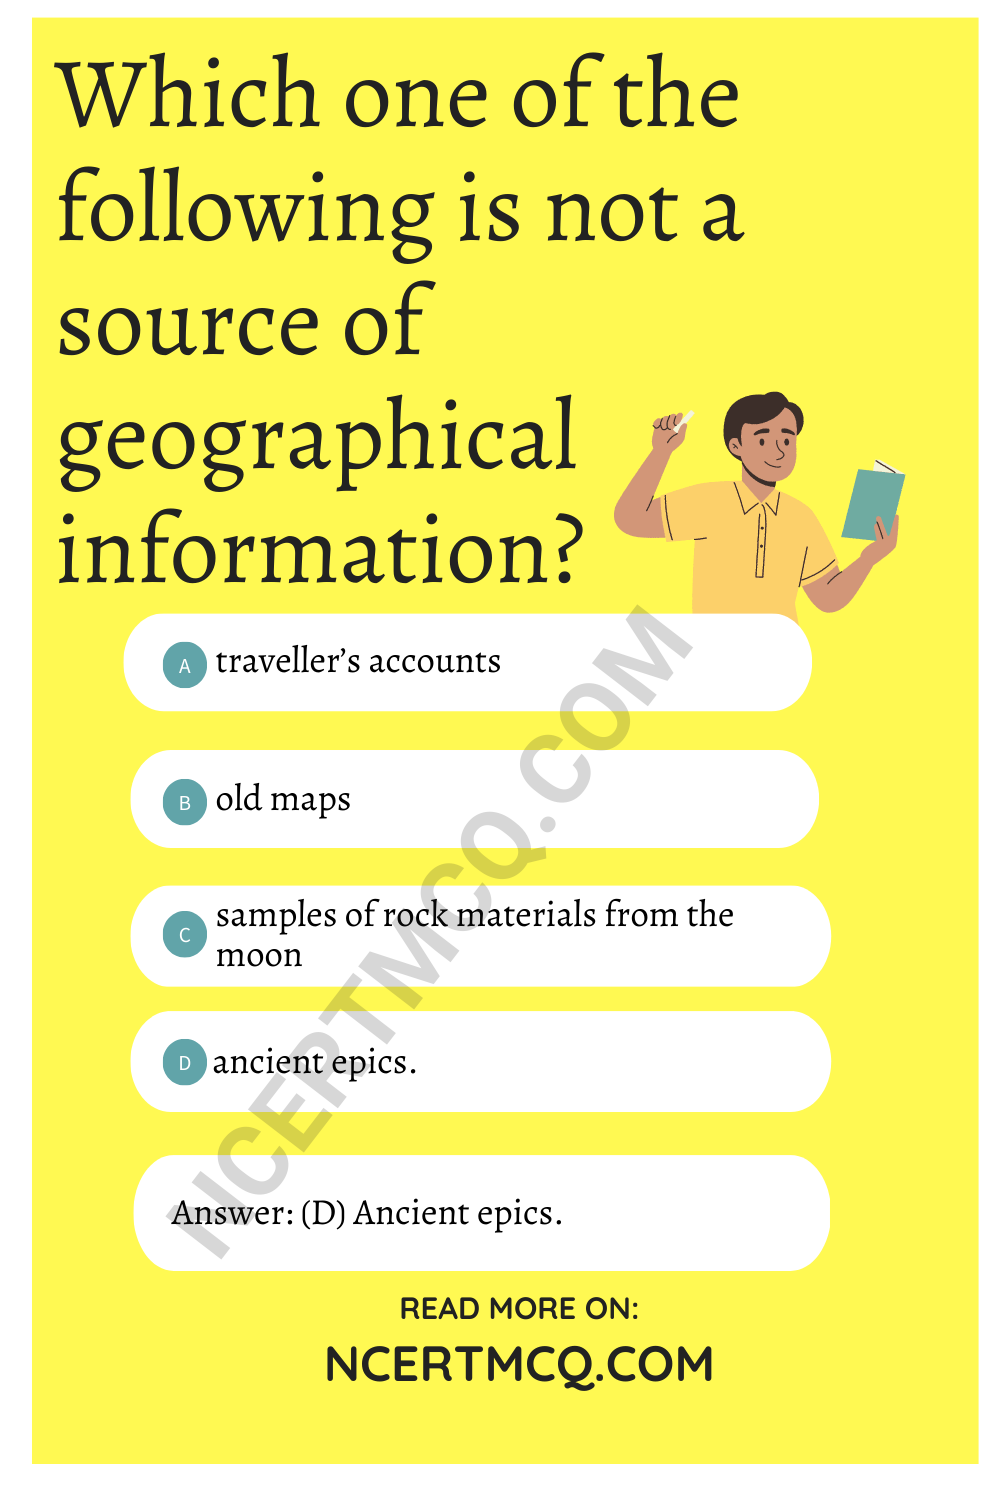 Which one of the following is not a source of geographical information?